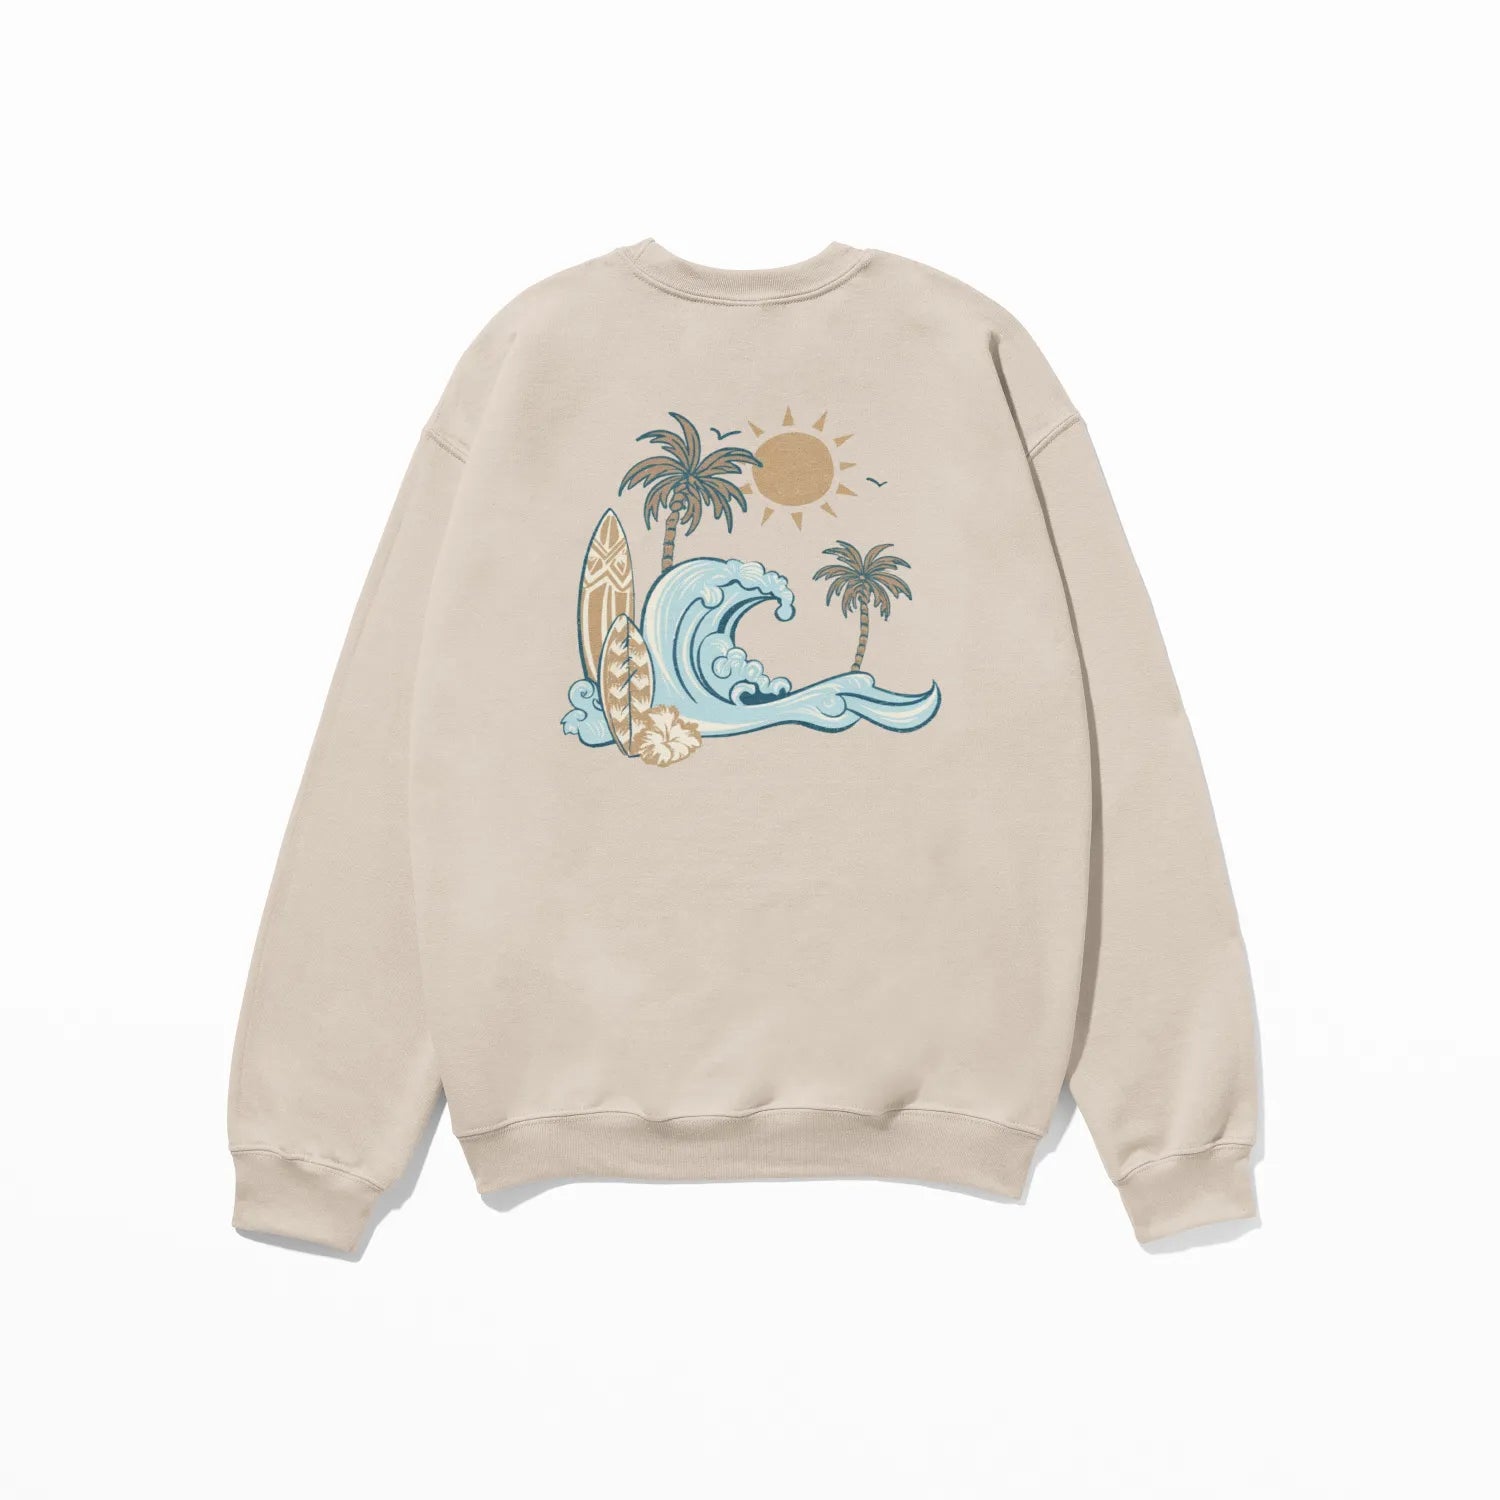 A beige Nalu o ka Mana (Waves of Faith) sweatshirt featuring a palm tree and wave design, perfect for Christian clothing enthusiasts from the Be Still and Know brand.